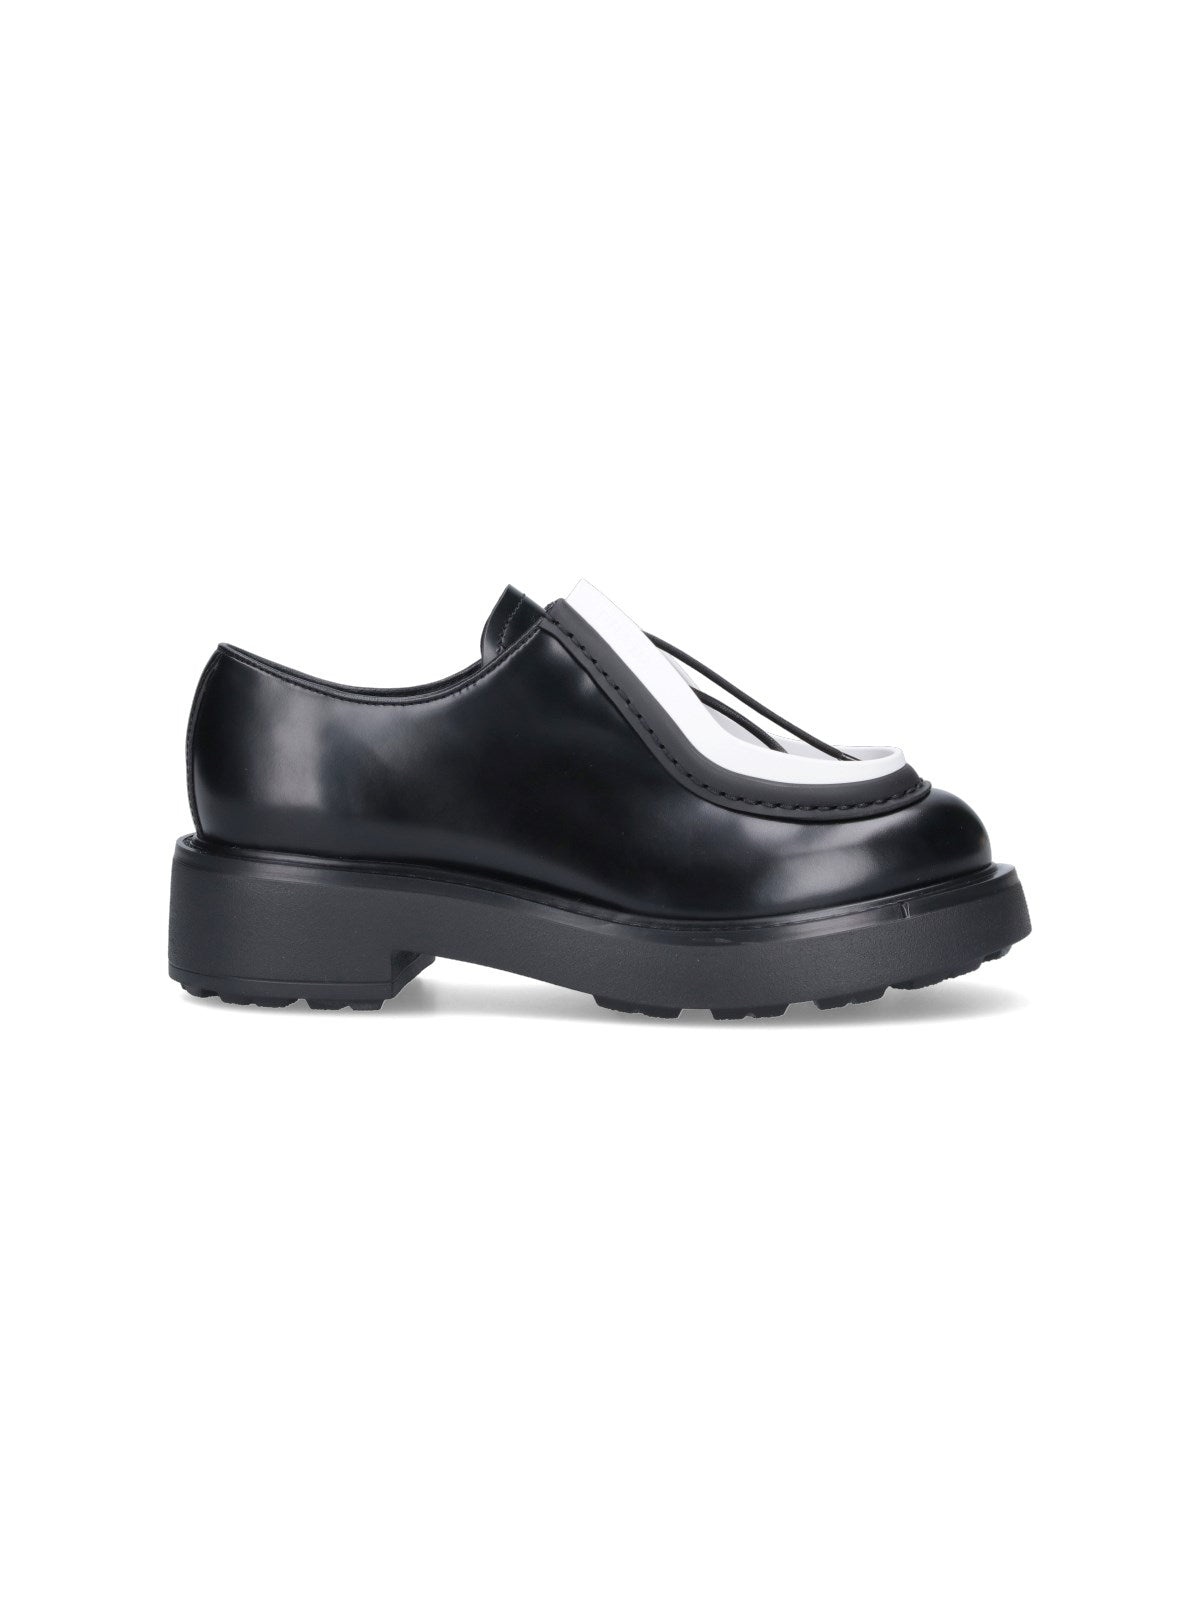 PRADA LEATHER LACE-UP SHOES - 1